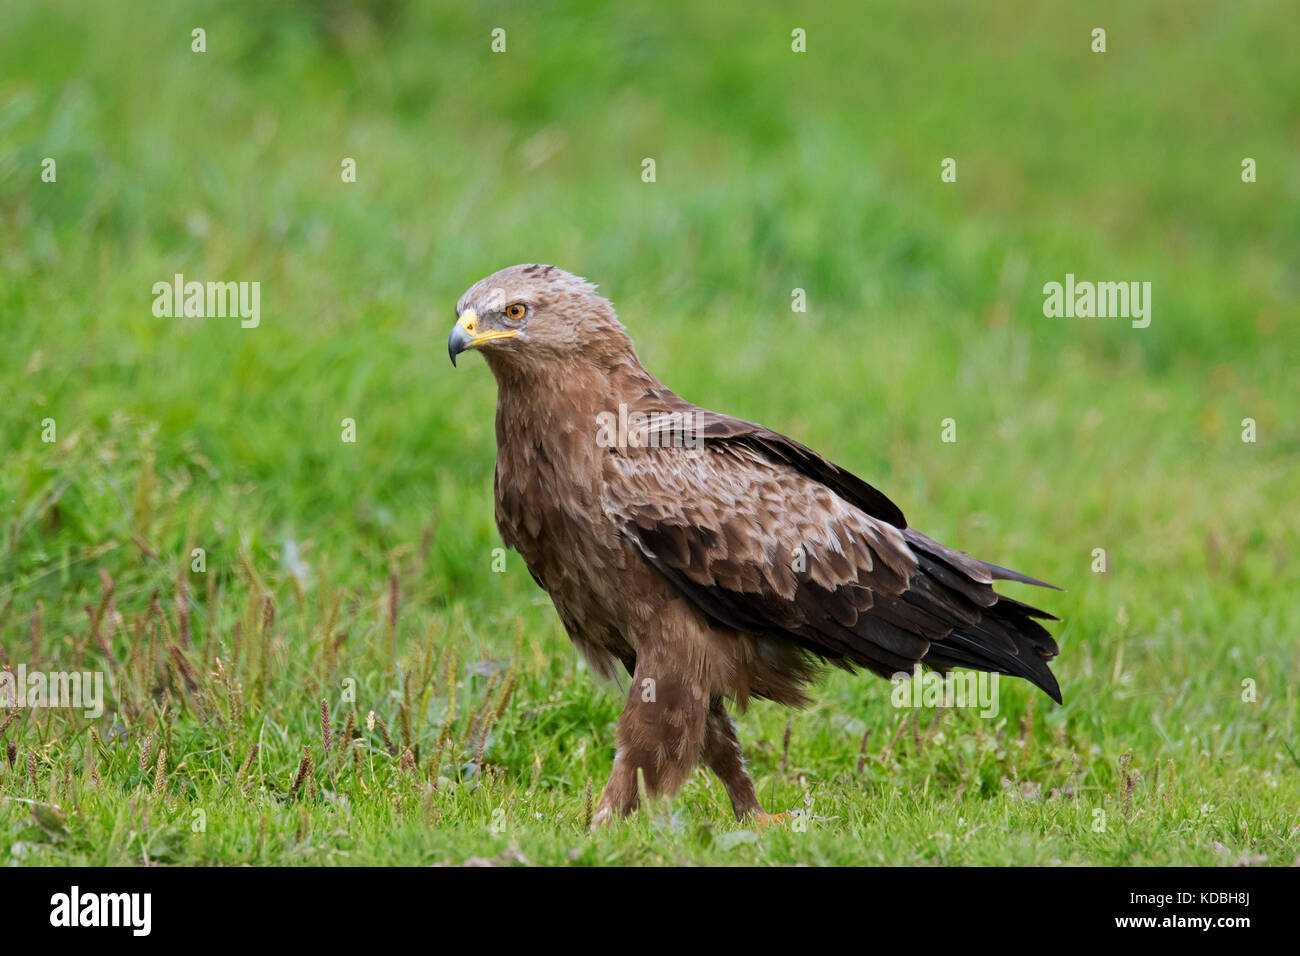 Lesser spotted eagle (Clanga pomarina / Aquila pomarina) in grassland, migratory bird of prey native to Central and Eastern Europe Stock Photo